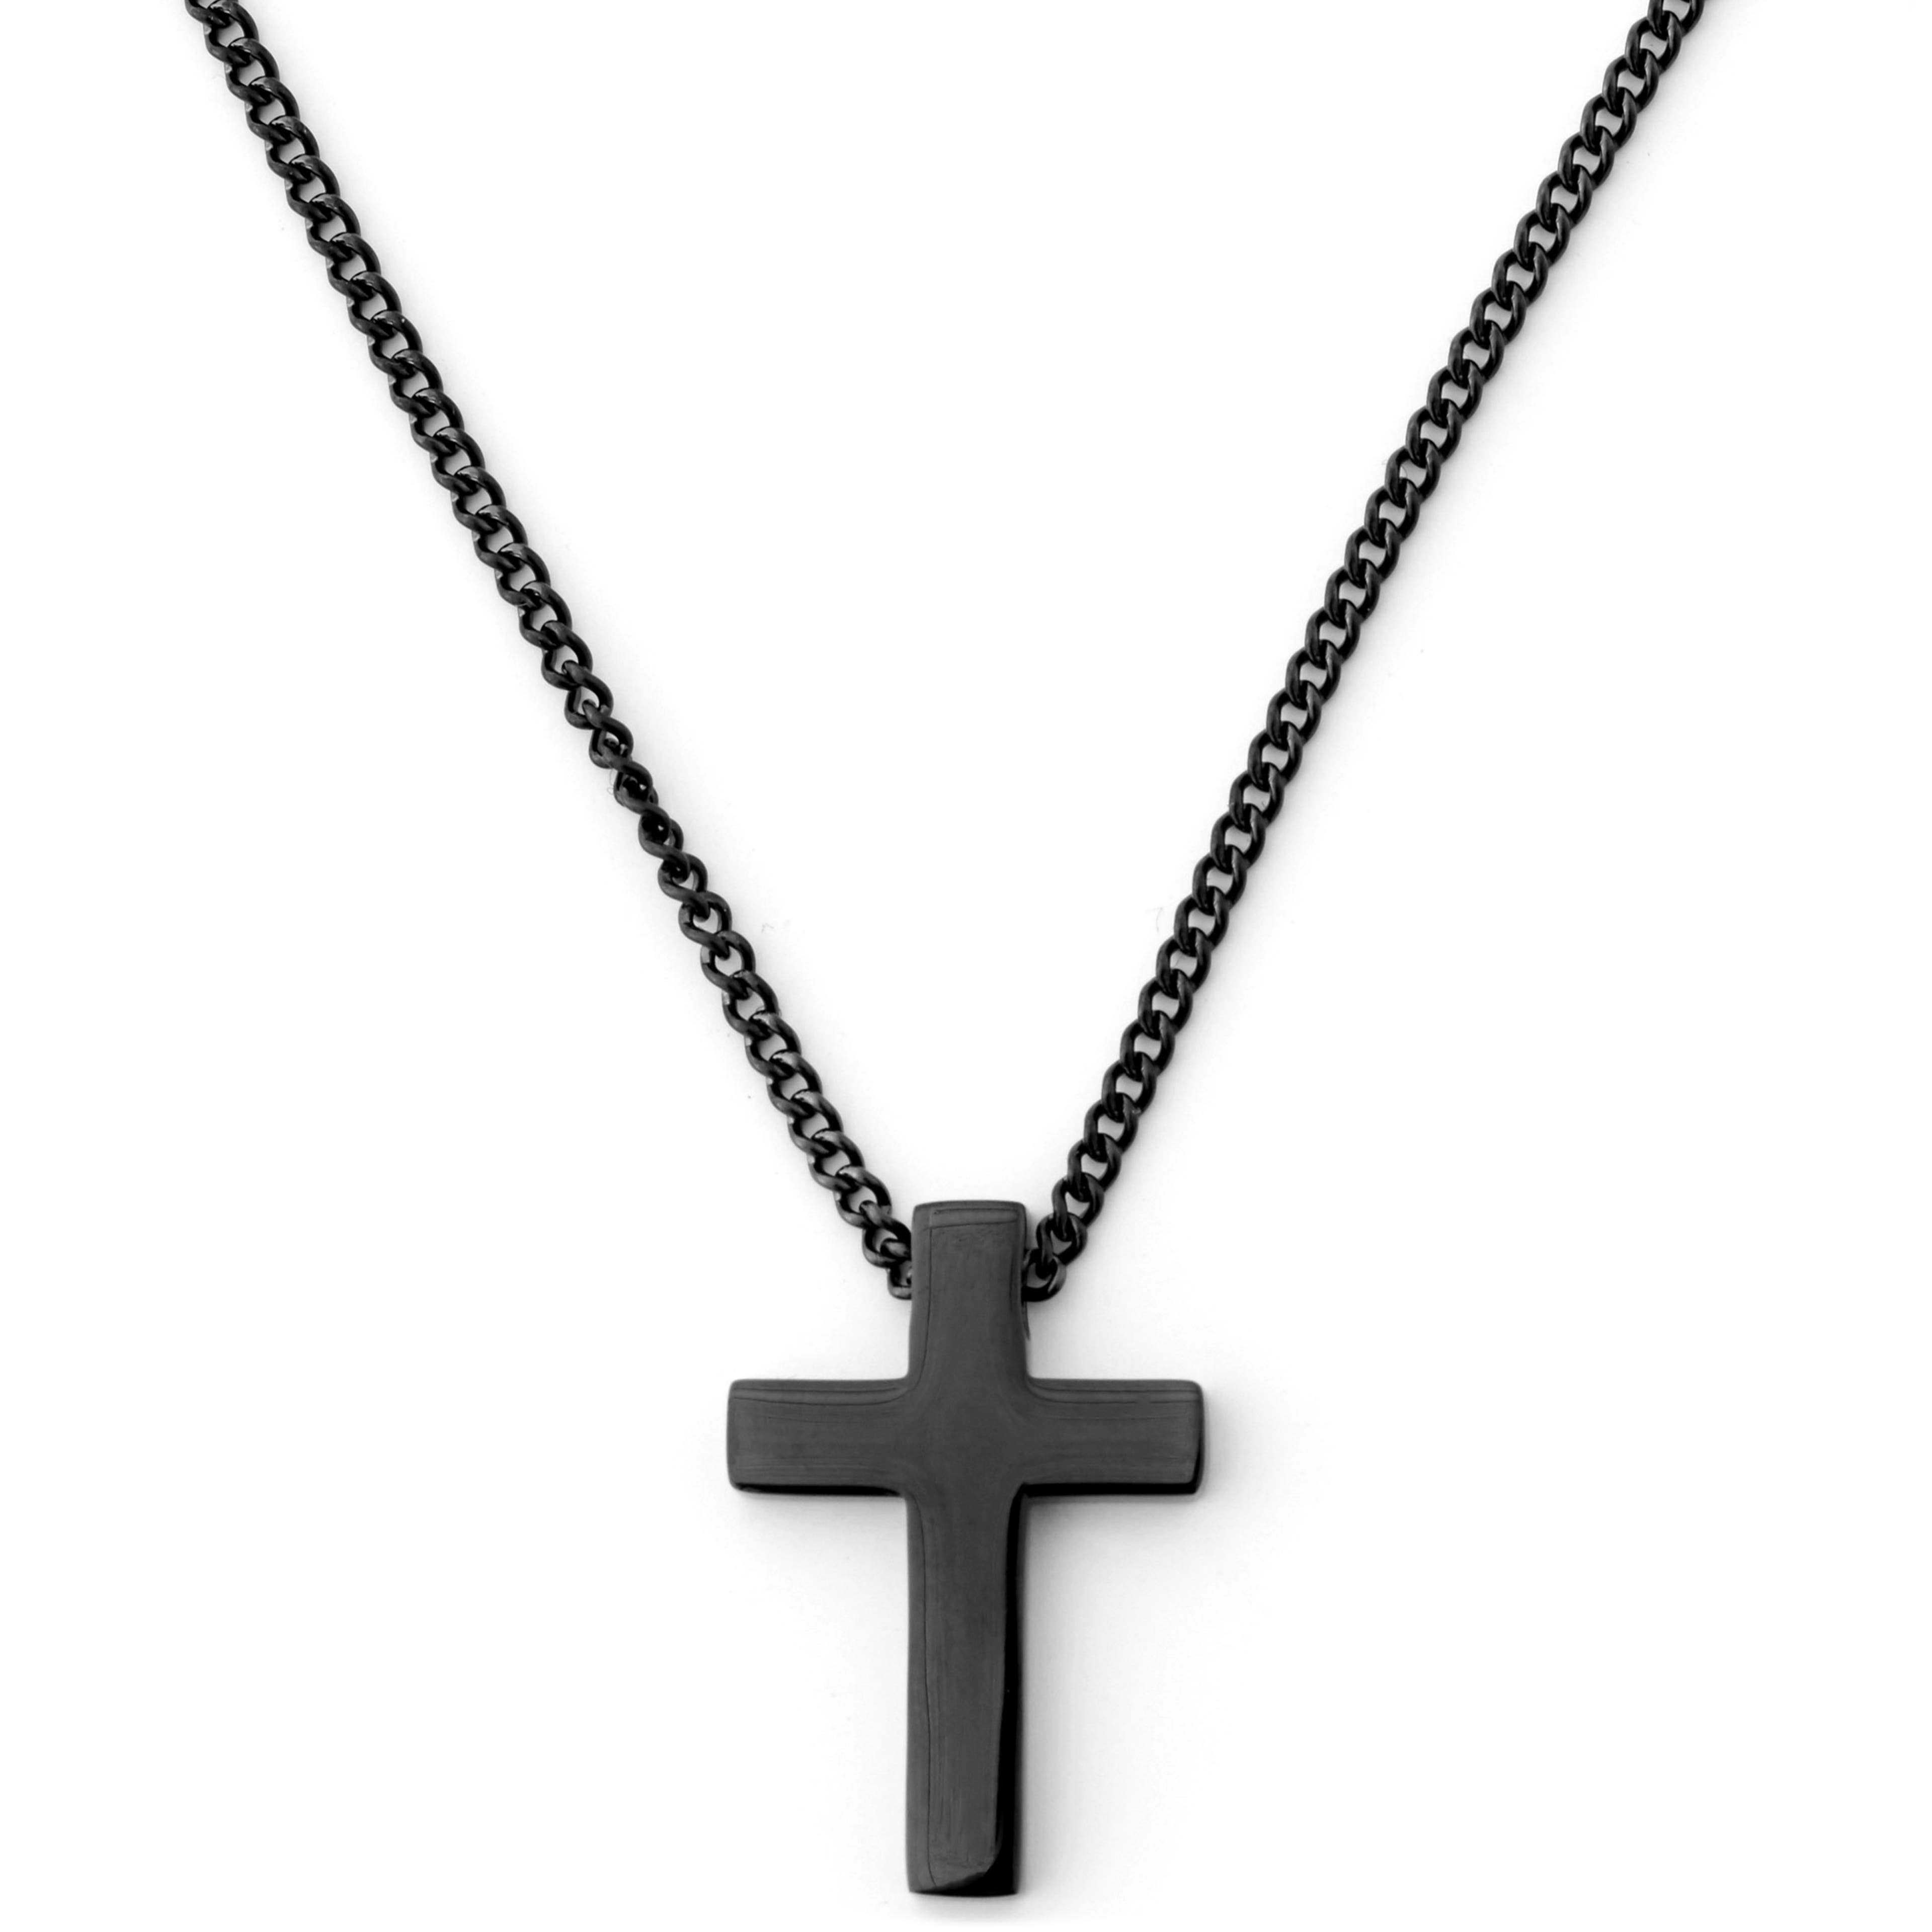 The Son Black Cross Iconic Necklace